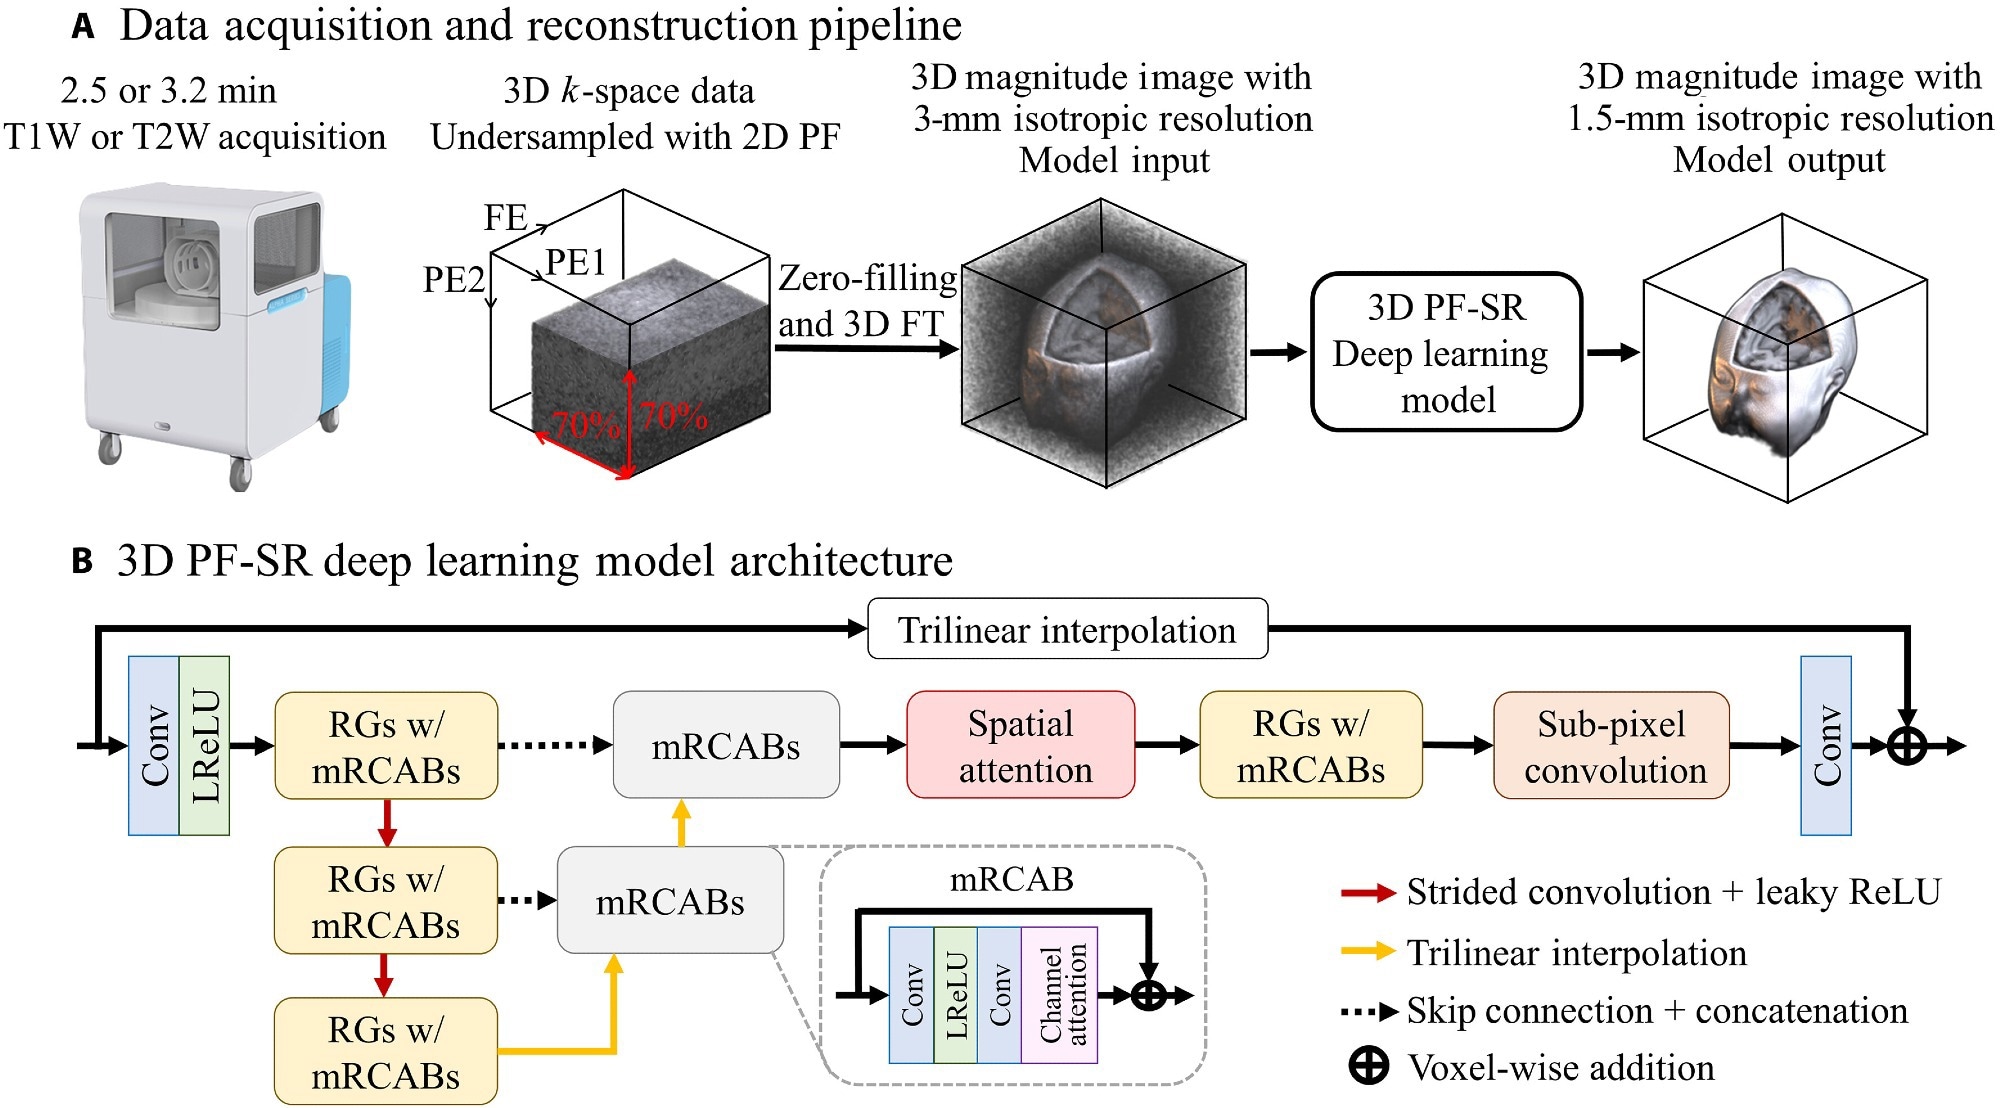 Data acquisition and DL reconstruction pipeline for fast ULF isotropic 3D brain MRI at 0.055 T. (A) Unlike typical ULF scans that acquire multiple NEXs, the proposed acquisition scheme acquires a single NEX, together with 2D PF sampling of a PF fraction of 0.7 in each of the two PE directions, in the FSE protocols for both T1W and T2W contrasts. The scan time is 2.5 and 3.2 min for T1W and T2W contrasts, respectively. The 3D data are then reconstructed by an end-to-end 3D DL model, which learns a residue between the high-resolution image and the interpolated low-resolution image. (B) The overall architecture of the DL 3D PF-SR reconstruction model. It is composed of residual groups (RGs) with modified residual channel attention blocks (mRCABs), multiscale feature extraction, spatial attention, and subpixel convolution. 3D convolution layer allows the effective extraction of 3D brain structural features. Multiscale feature extraction learns local features at the top-scale level and semiglobal features at the middle- to bottom-scale level. Spatial attention exploits the interspatial relationships by modulating the extracted features, which are then upsampled to the high-resolution space via subpixel convolution and transformed into a 3D image residue through a convolution layer. The final 3D image is formed by voxel-wise addition of the 3D image residue and the interpolated low-resolution image.